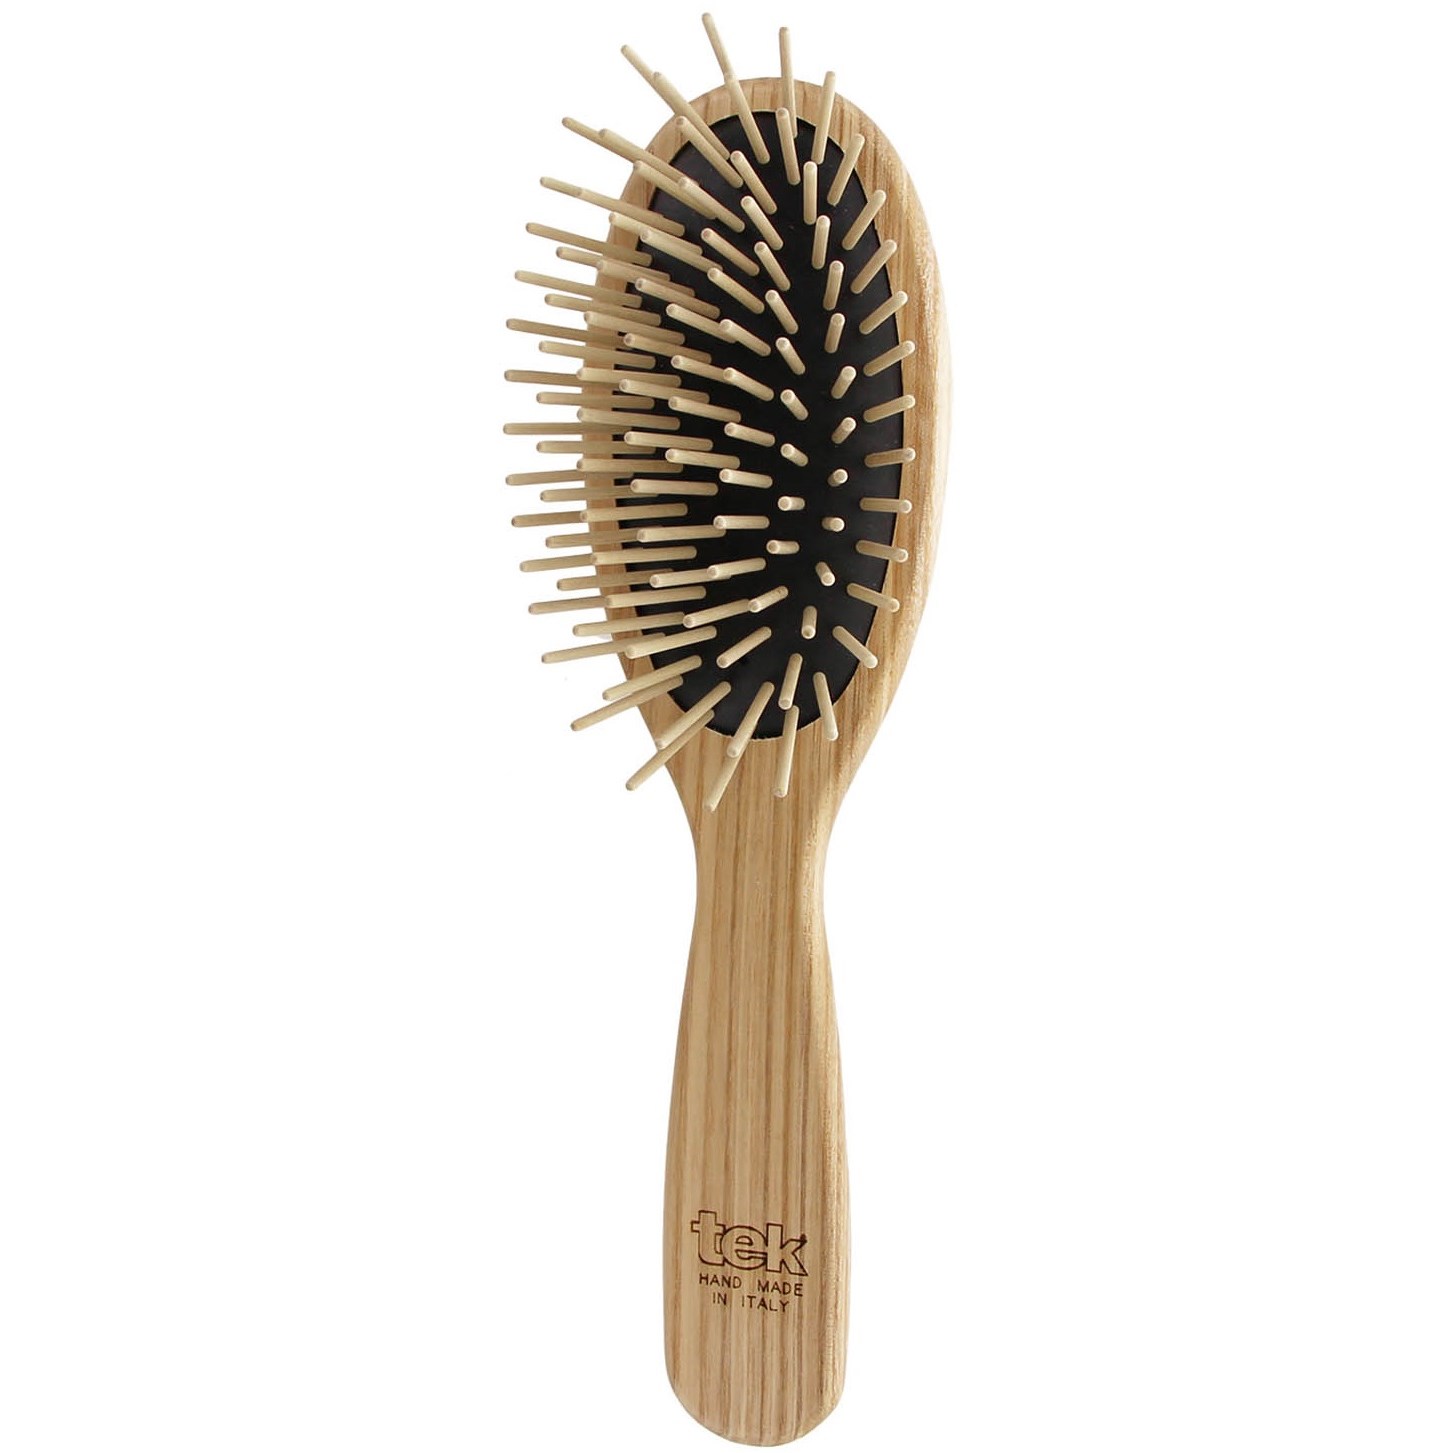 Tek Big Oval Hair Brush With Long Wooden Pins